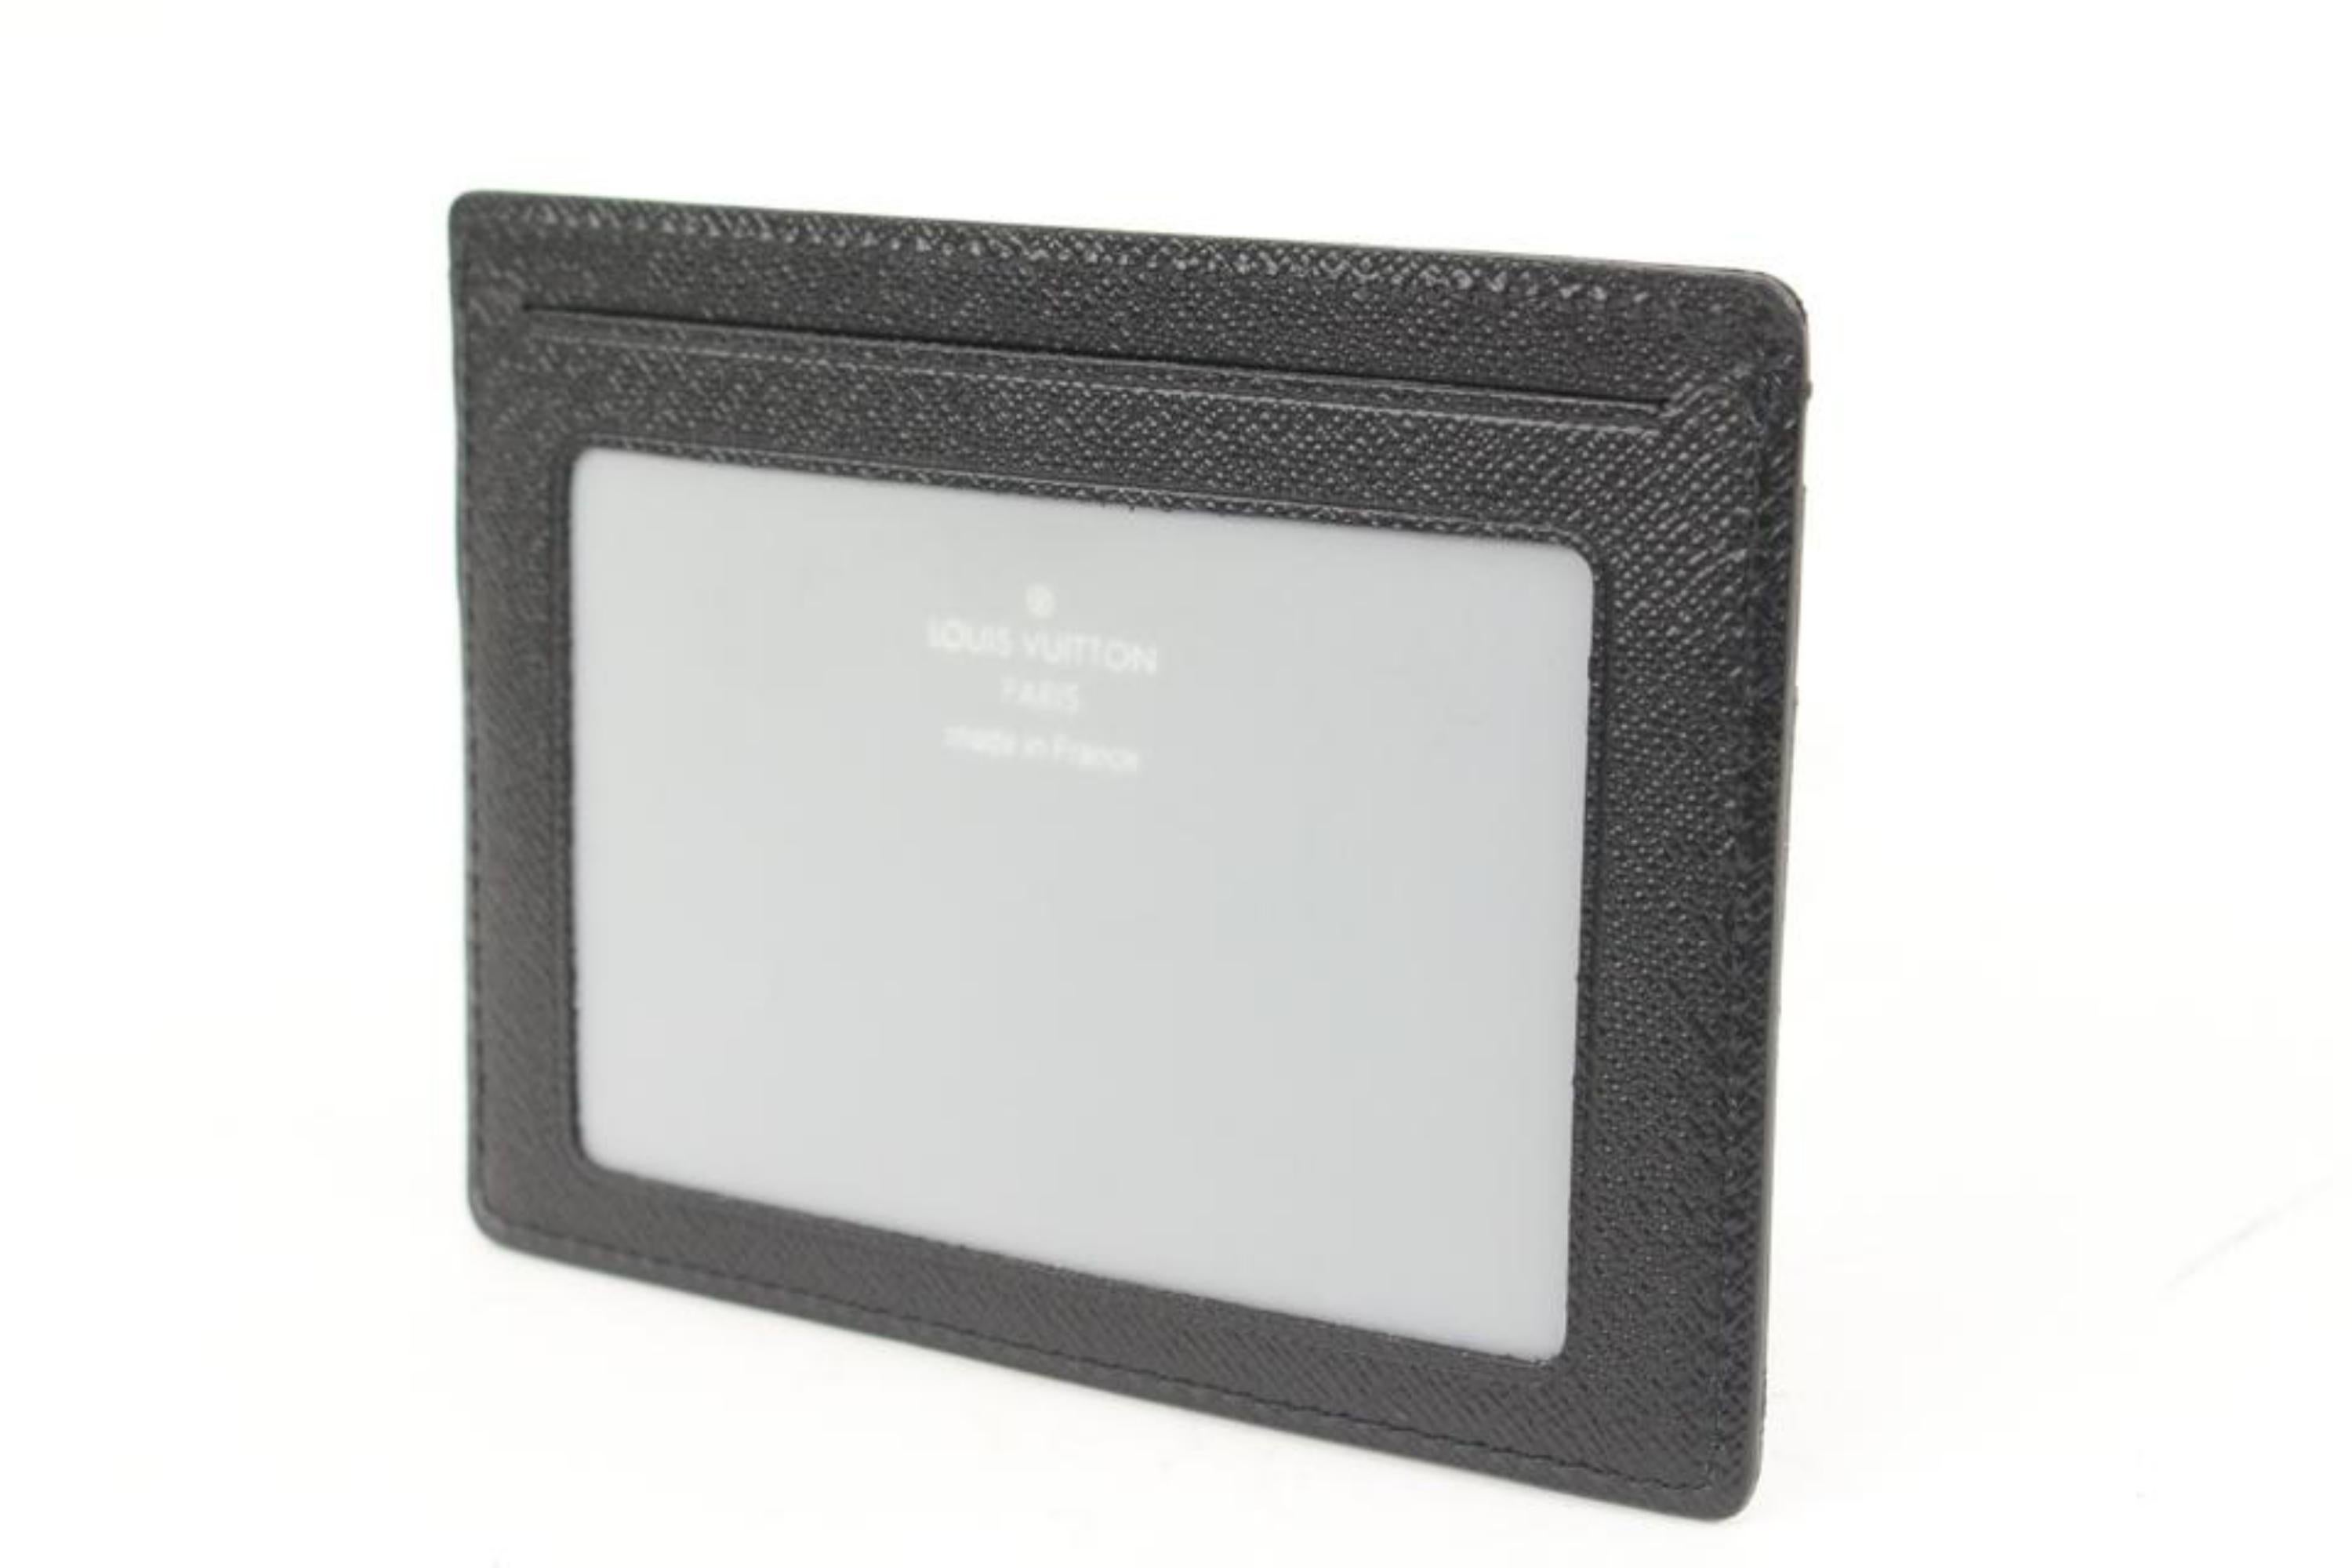 Louis Vuitton Black x Grey Damier Graphite Card Case Wallet Insert Holder 9lv321s
Date Code/Serial Number: SP4009
Made In: France
Measurements: Length:  4.8